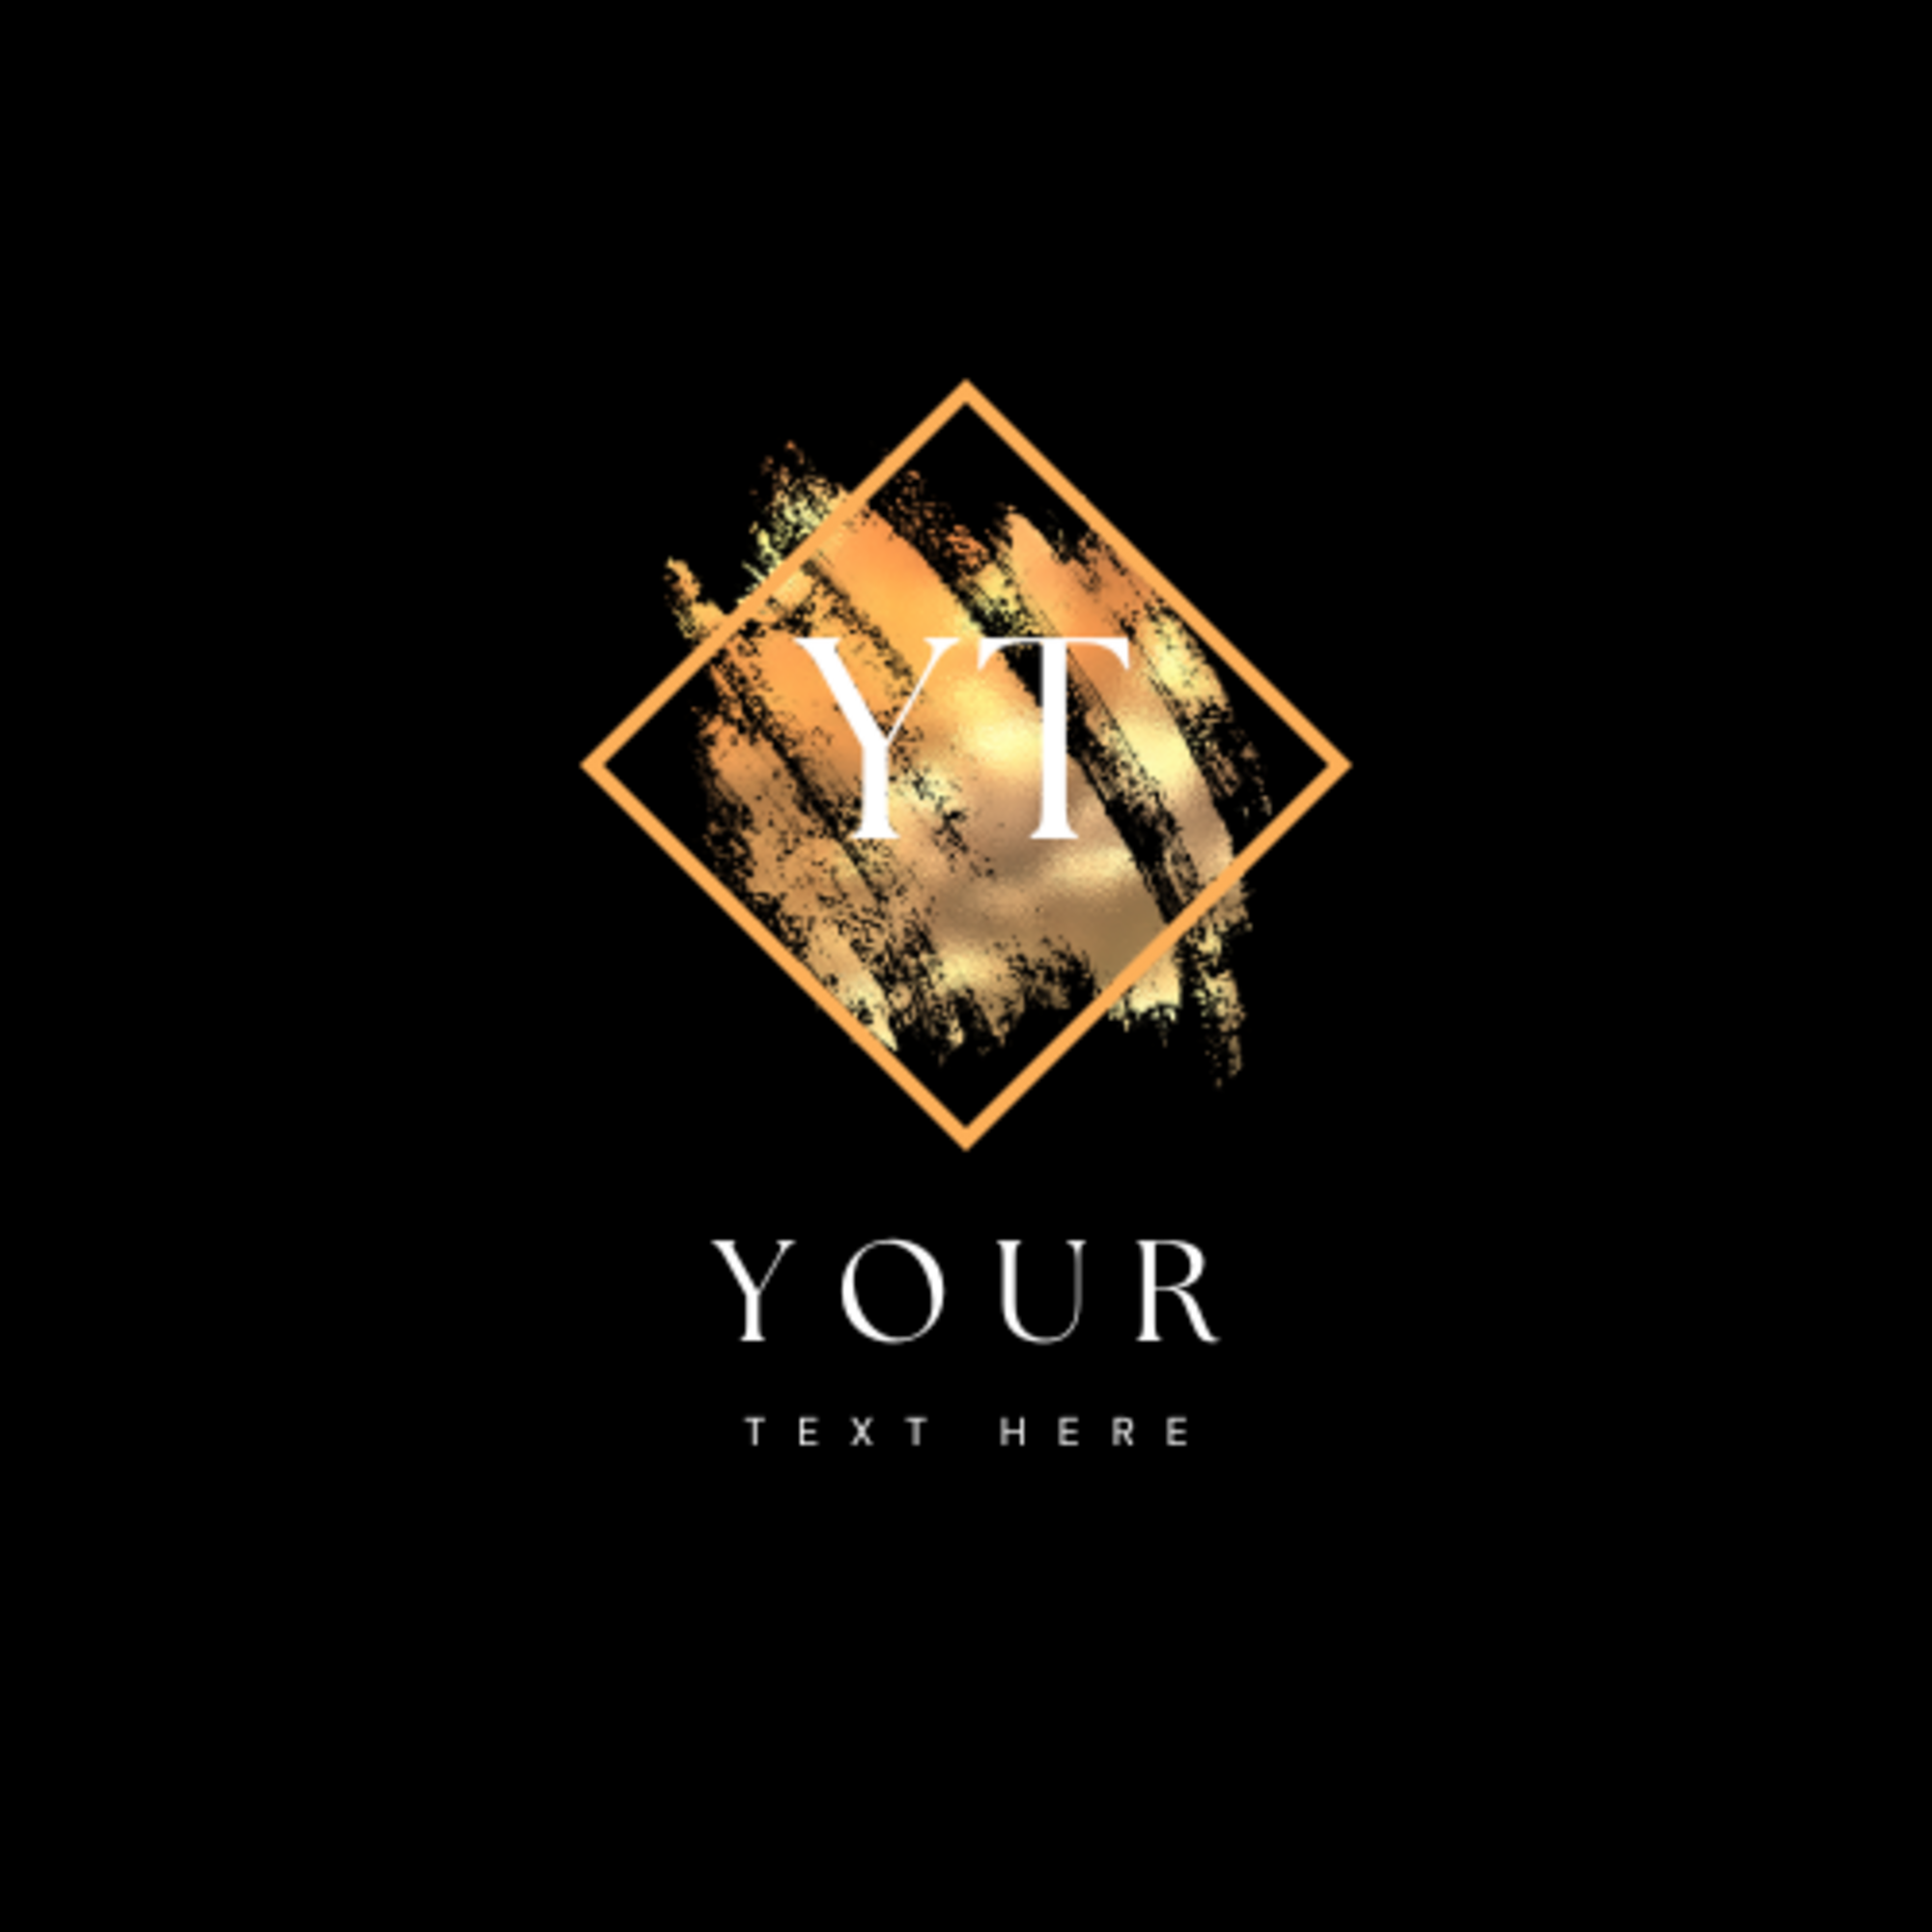 Black and gold logo with the letter yh.